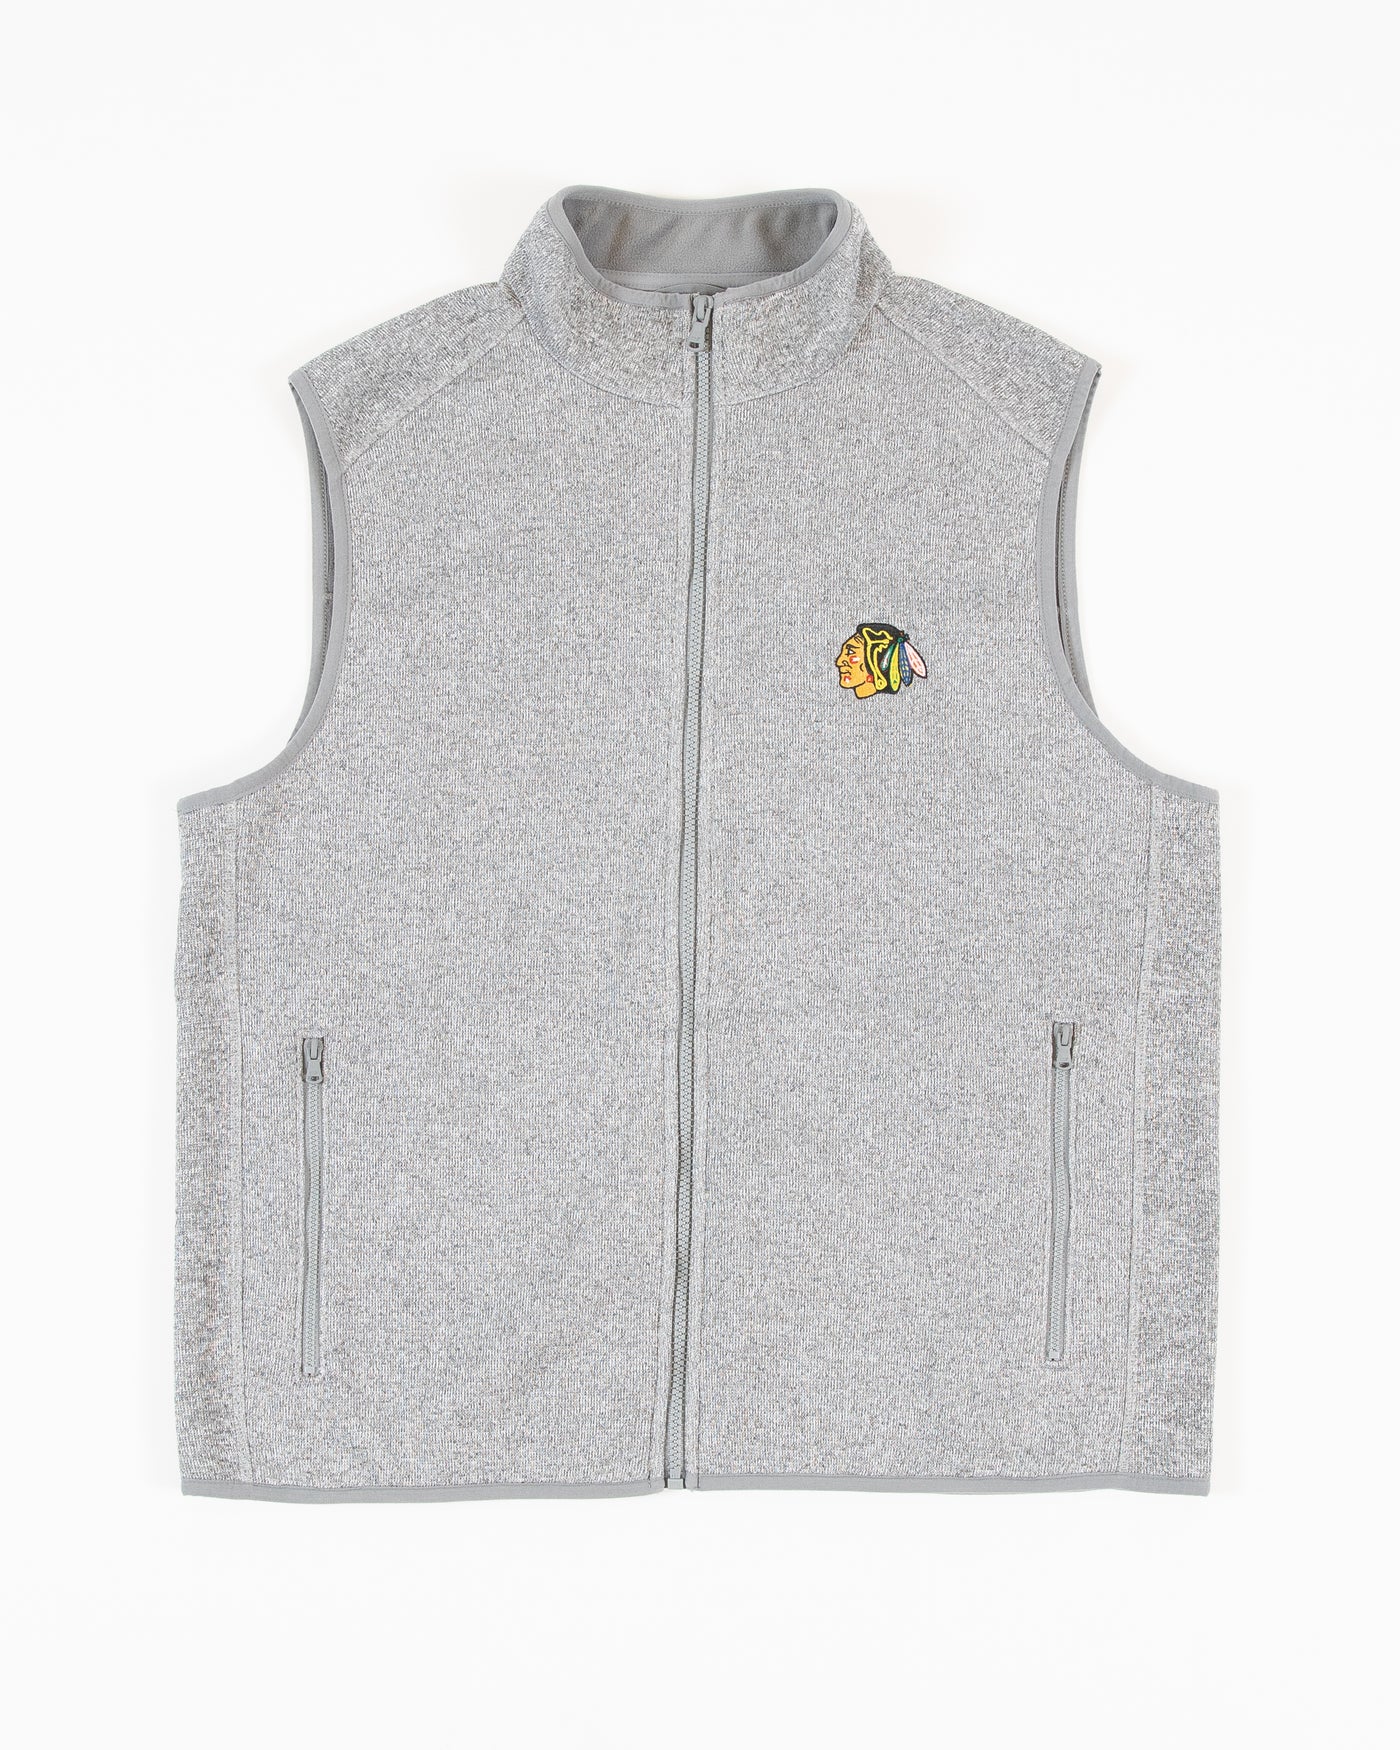 Vineyard Vines heather grey zip up vest with embroidered primary logo on left chest - lay flat front